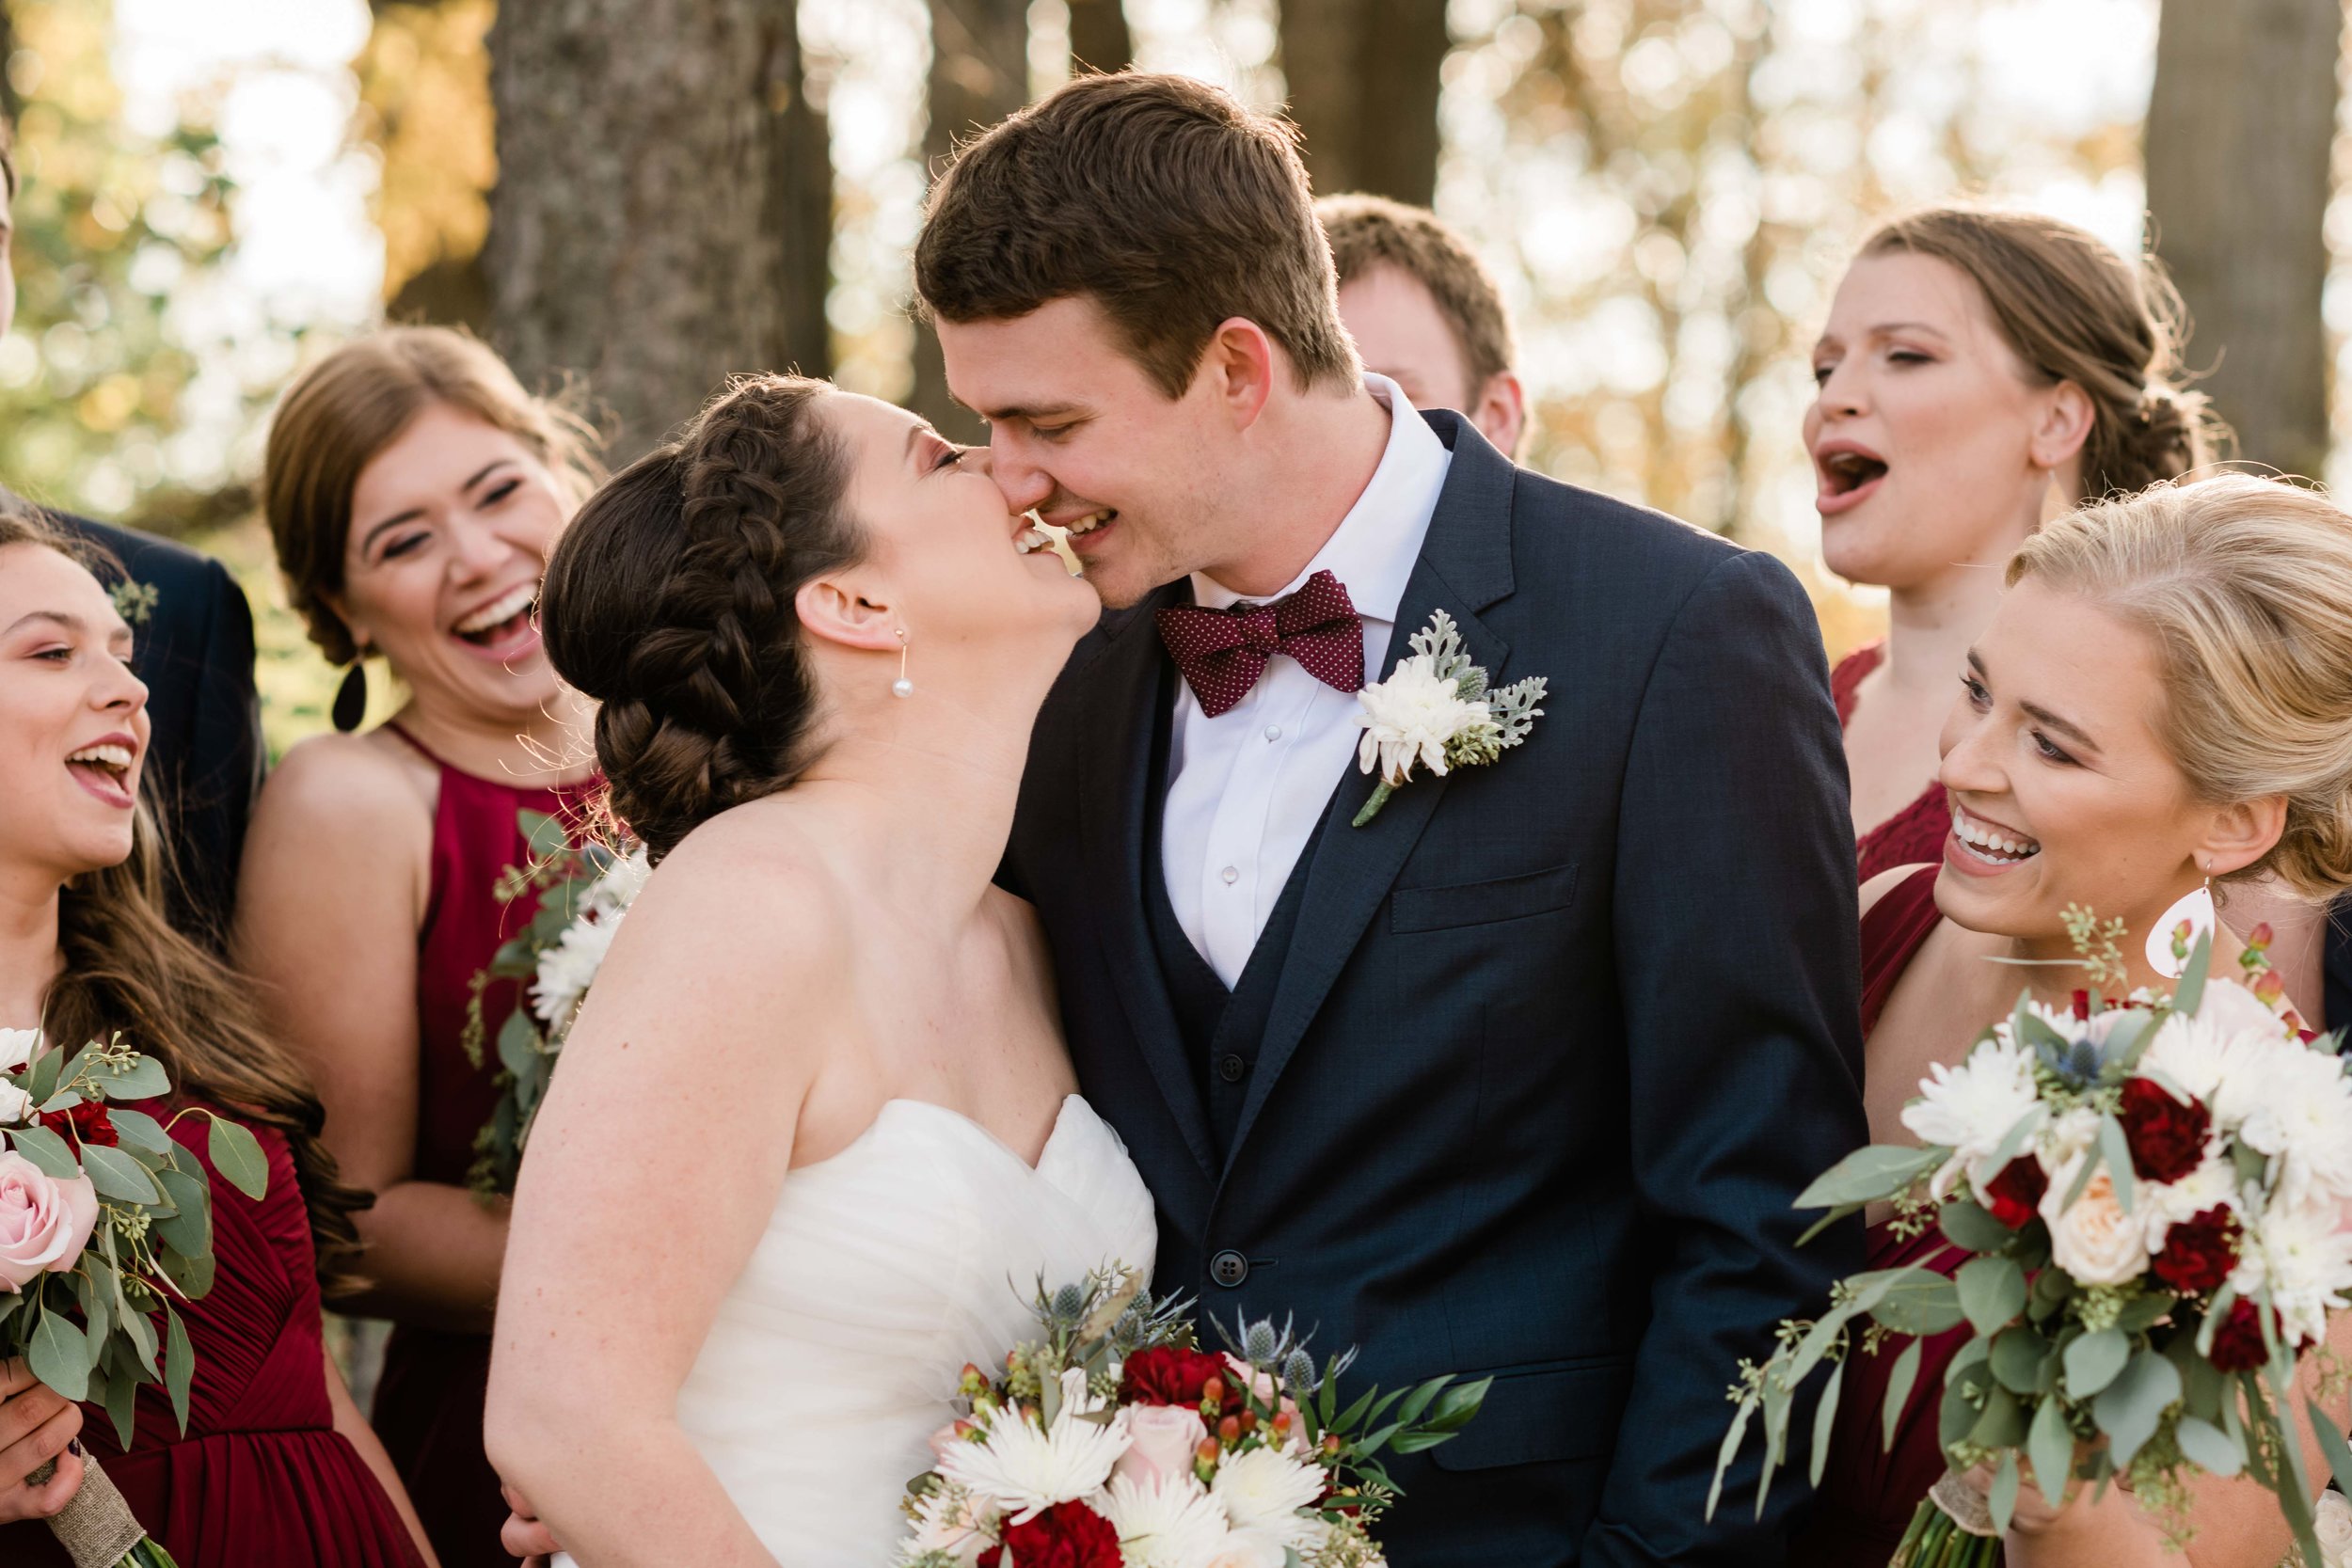 Bride and groom kiss as wedding party cheers them on